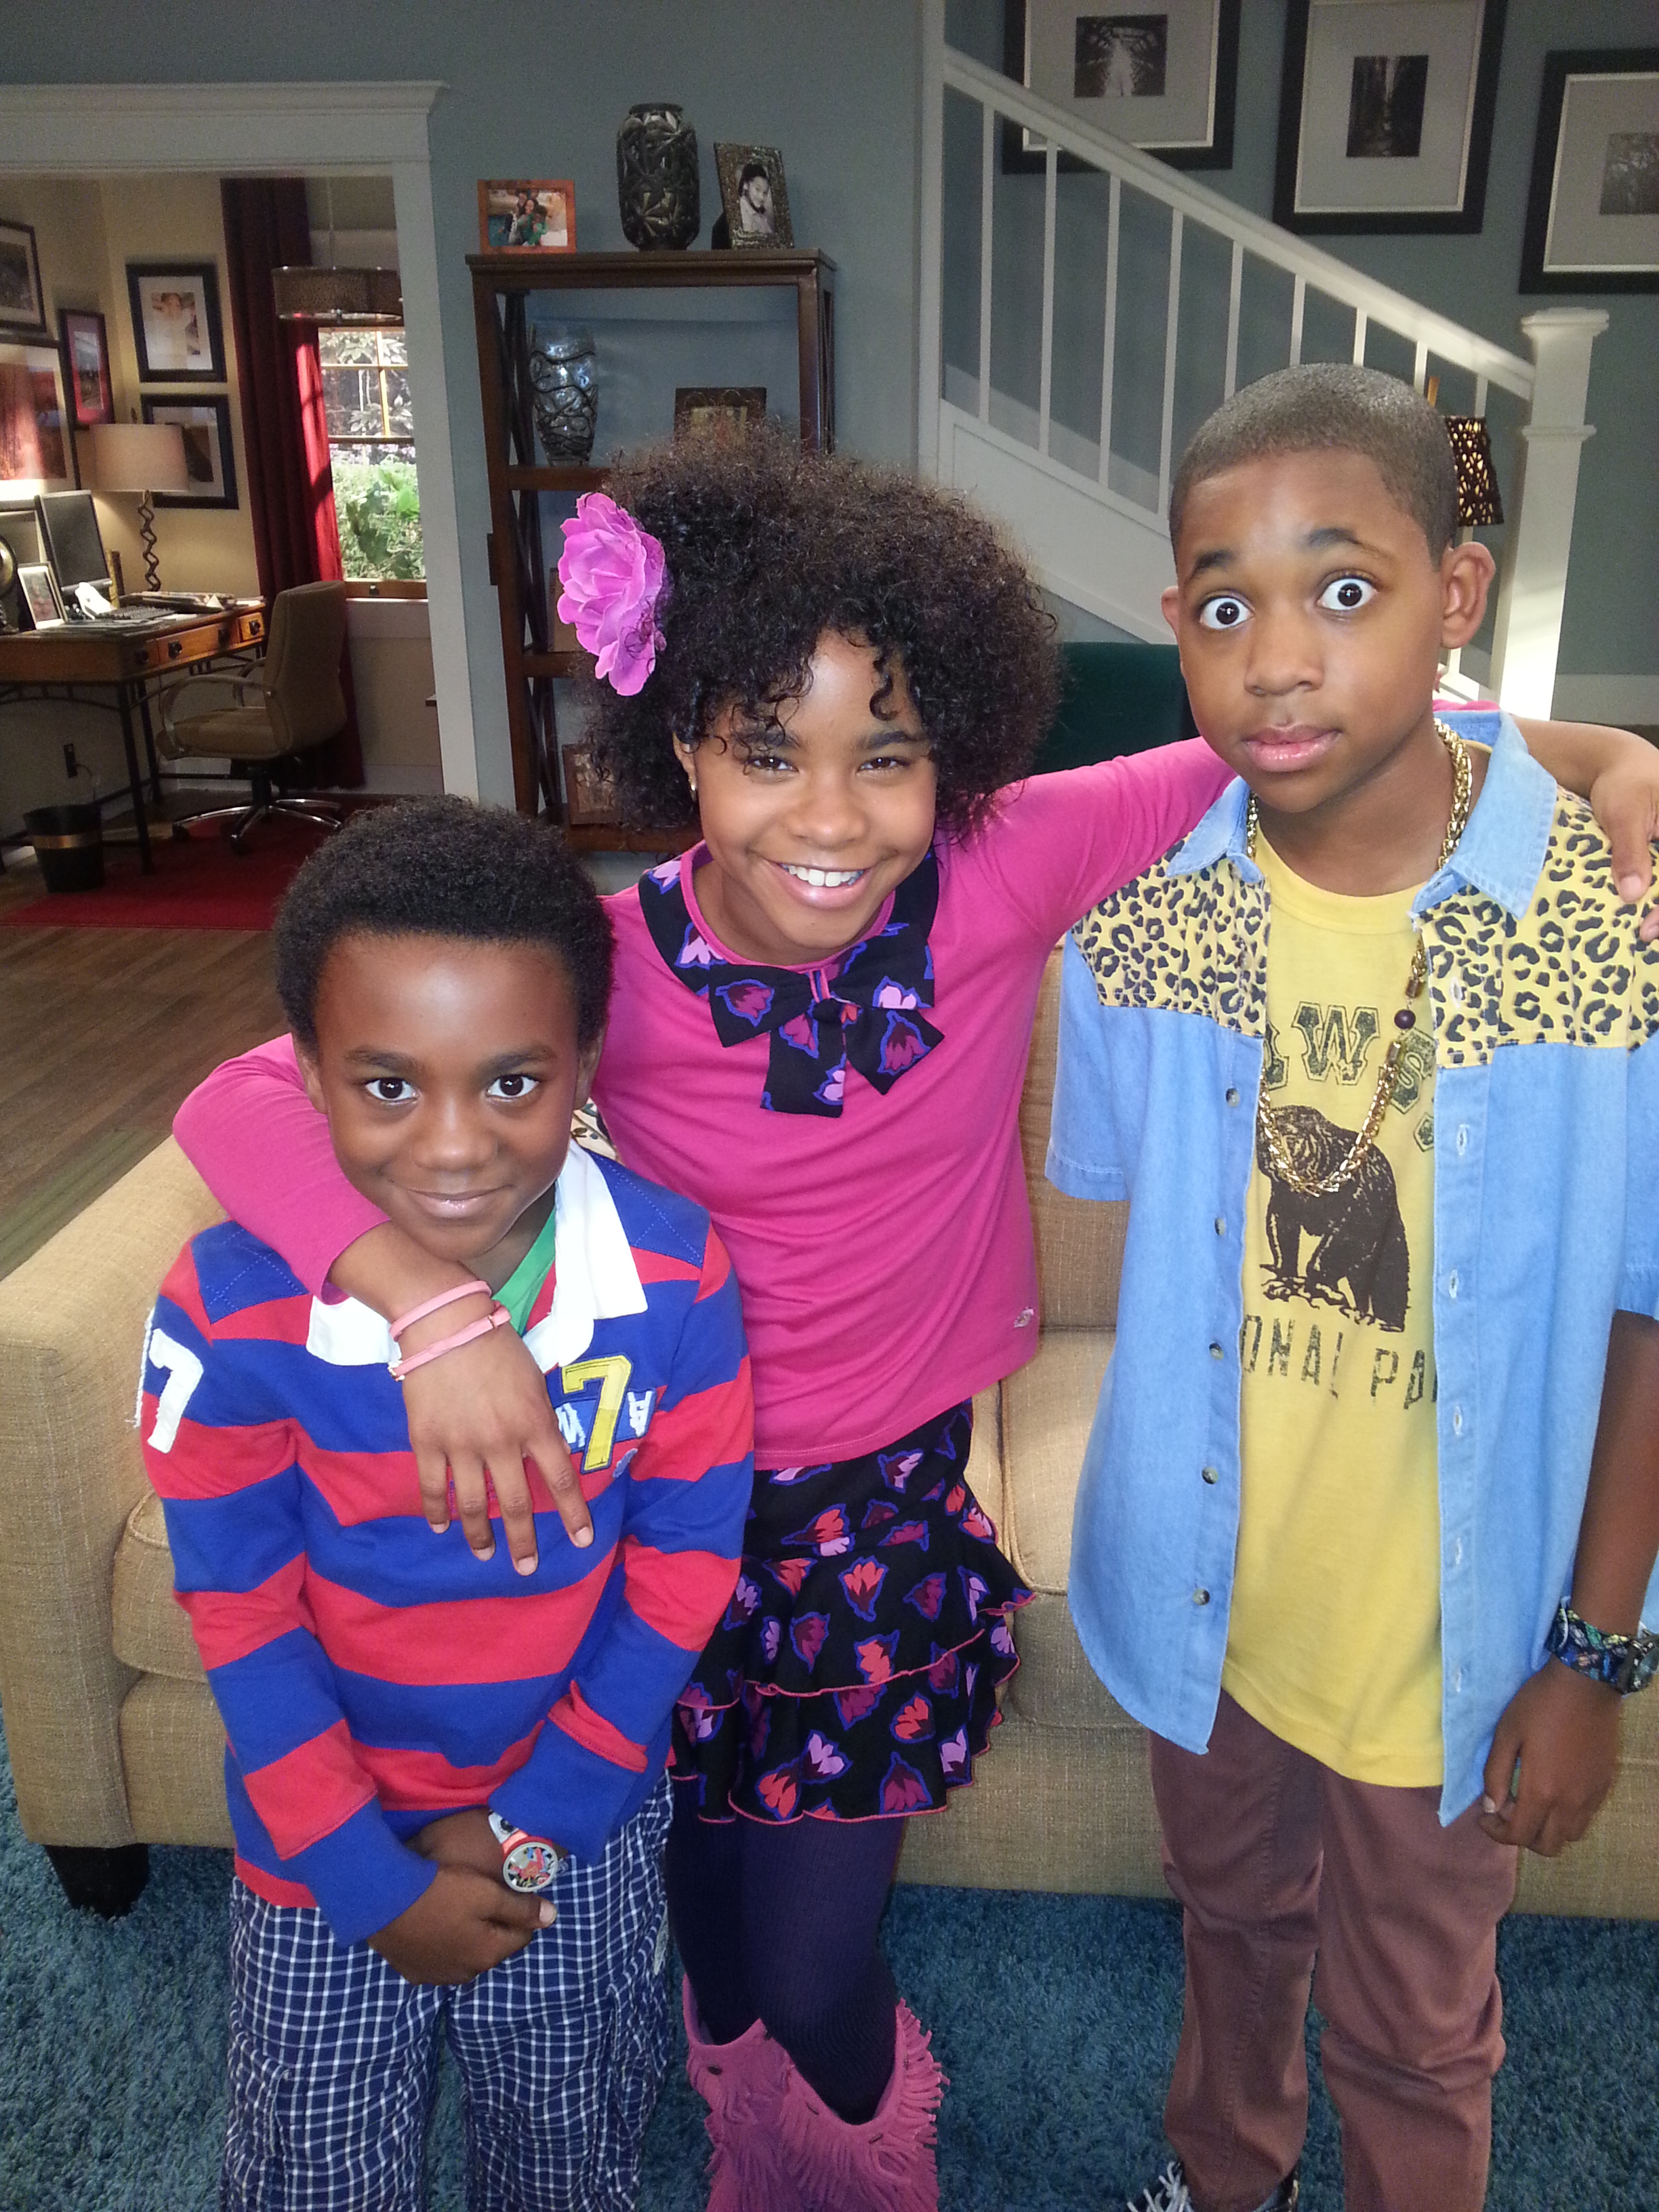 On set filming Instant Mom!